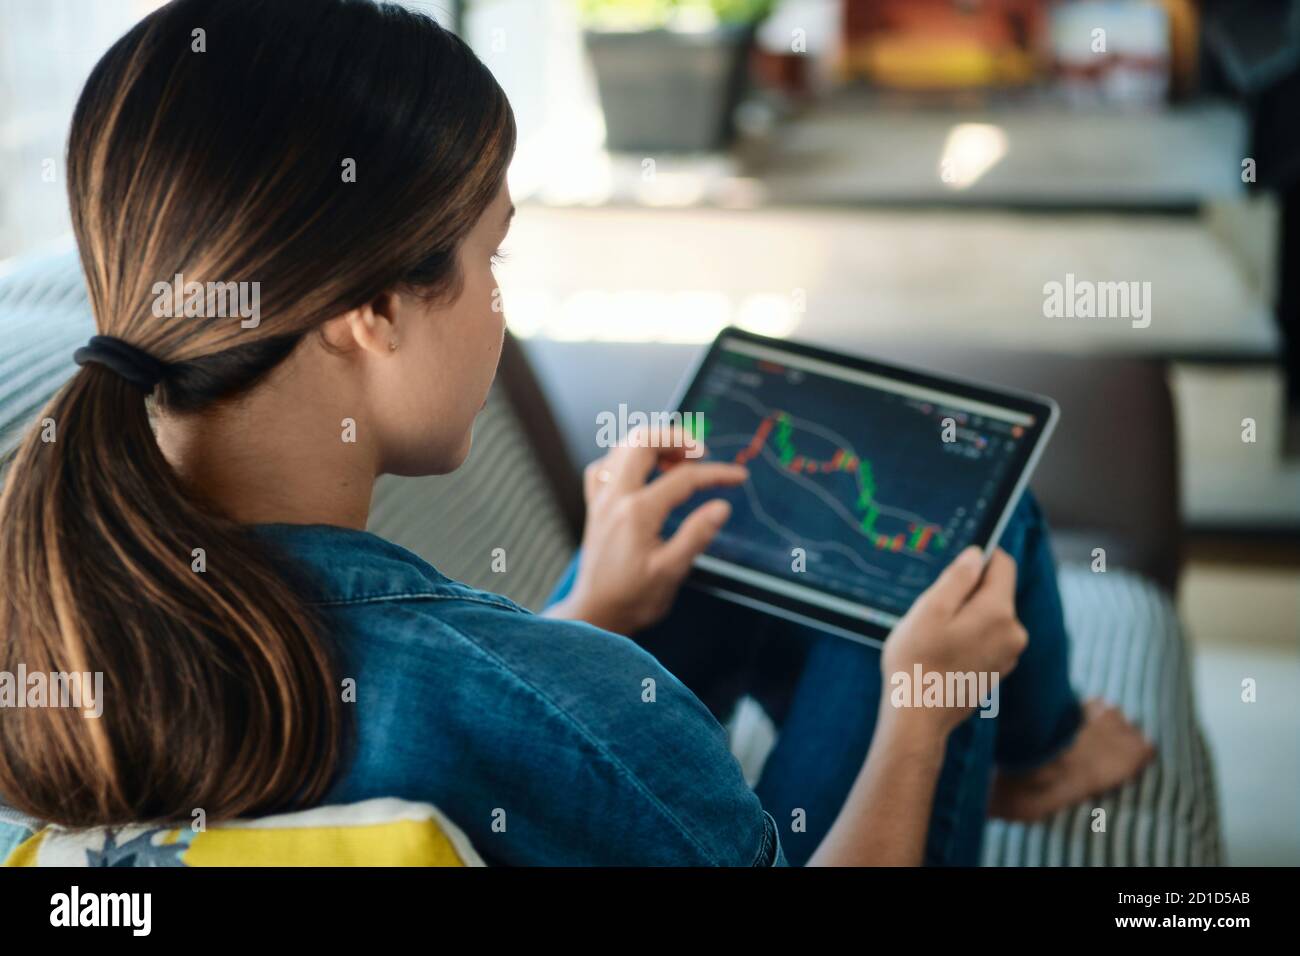 Woman Trading Online Using Tablet Computer On Sofa Stock Photo